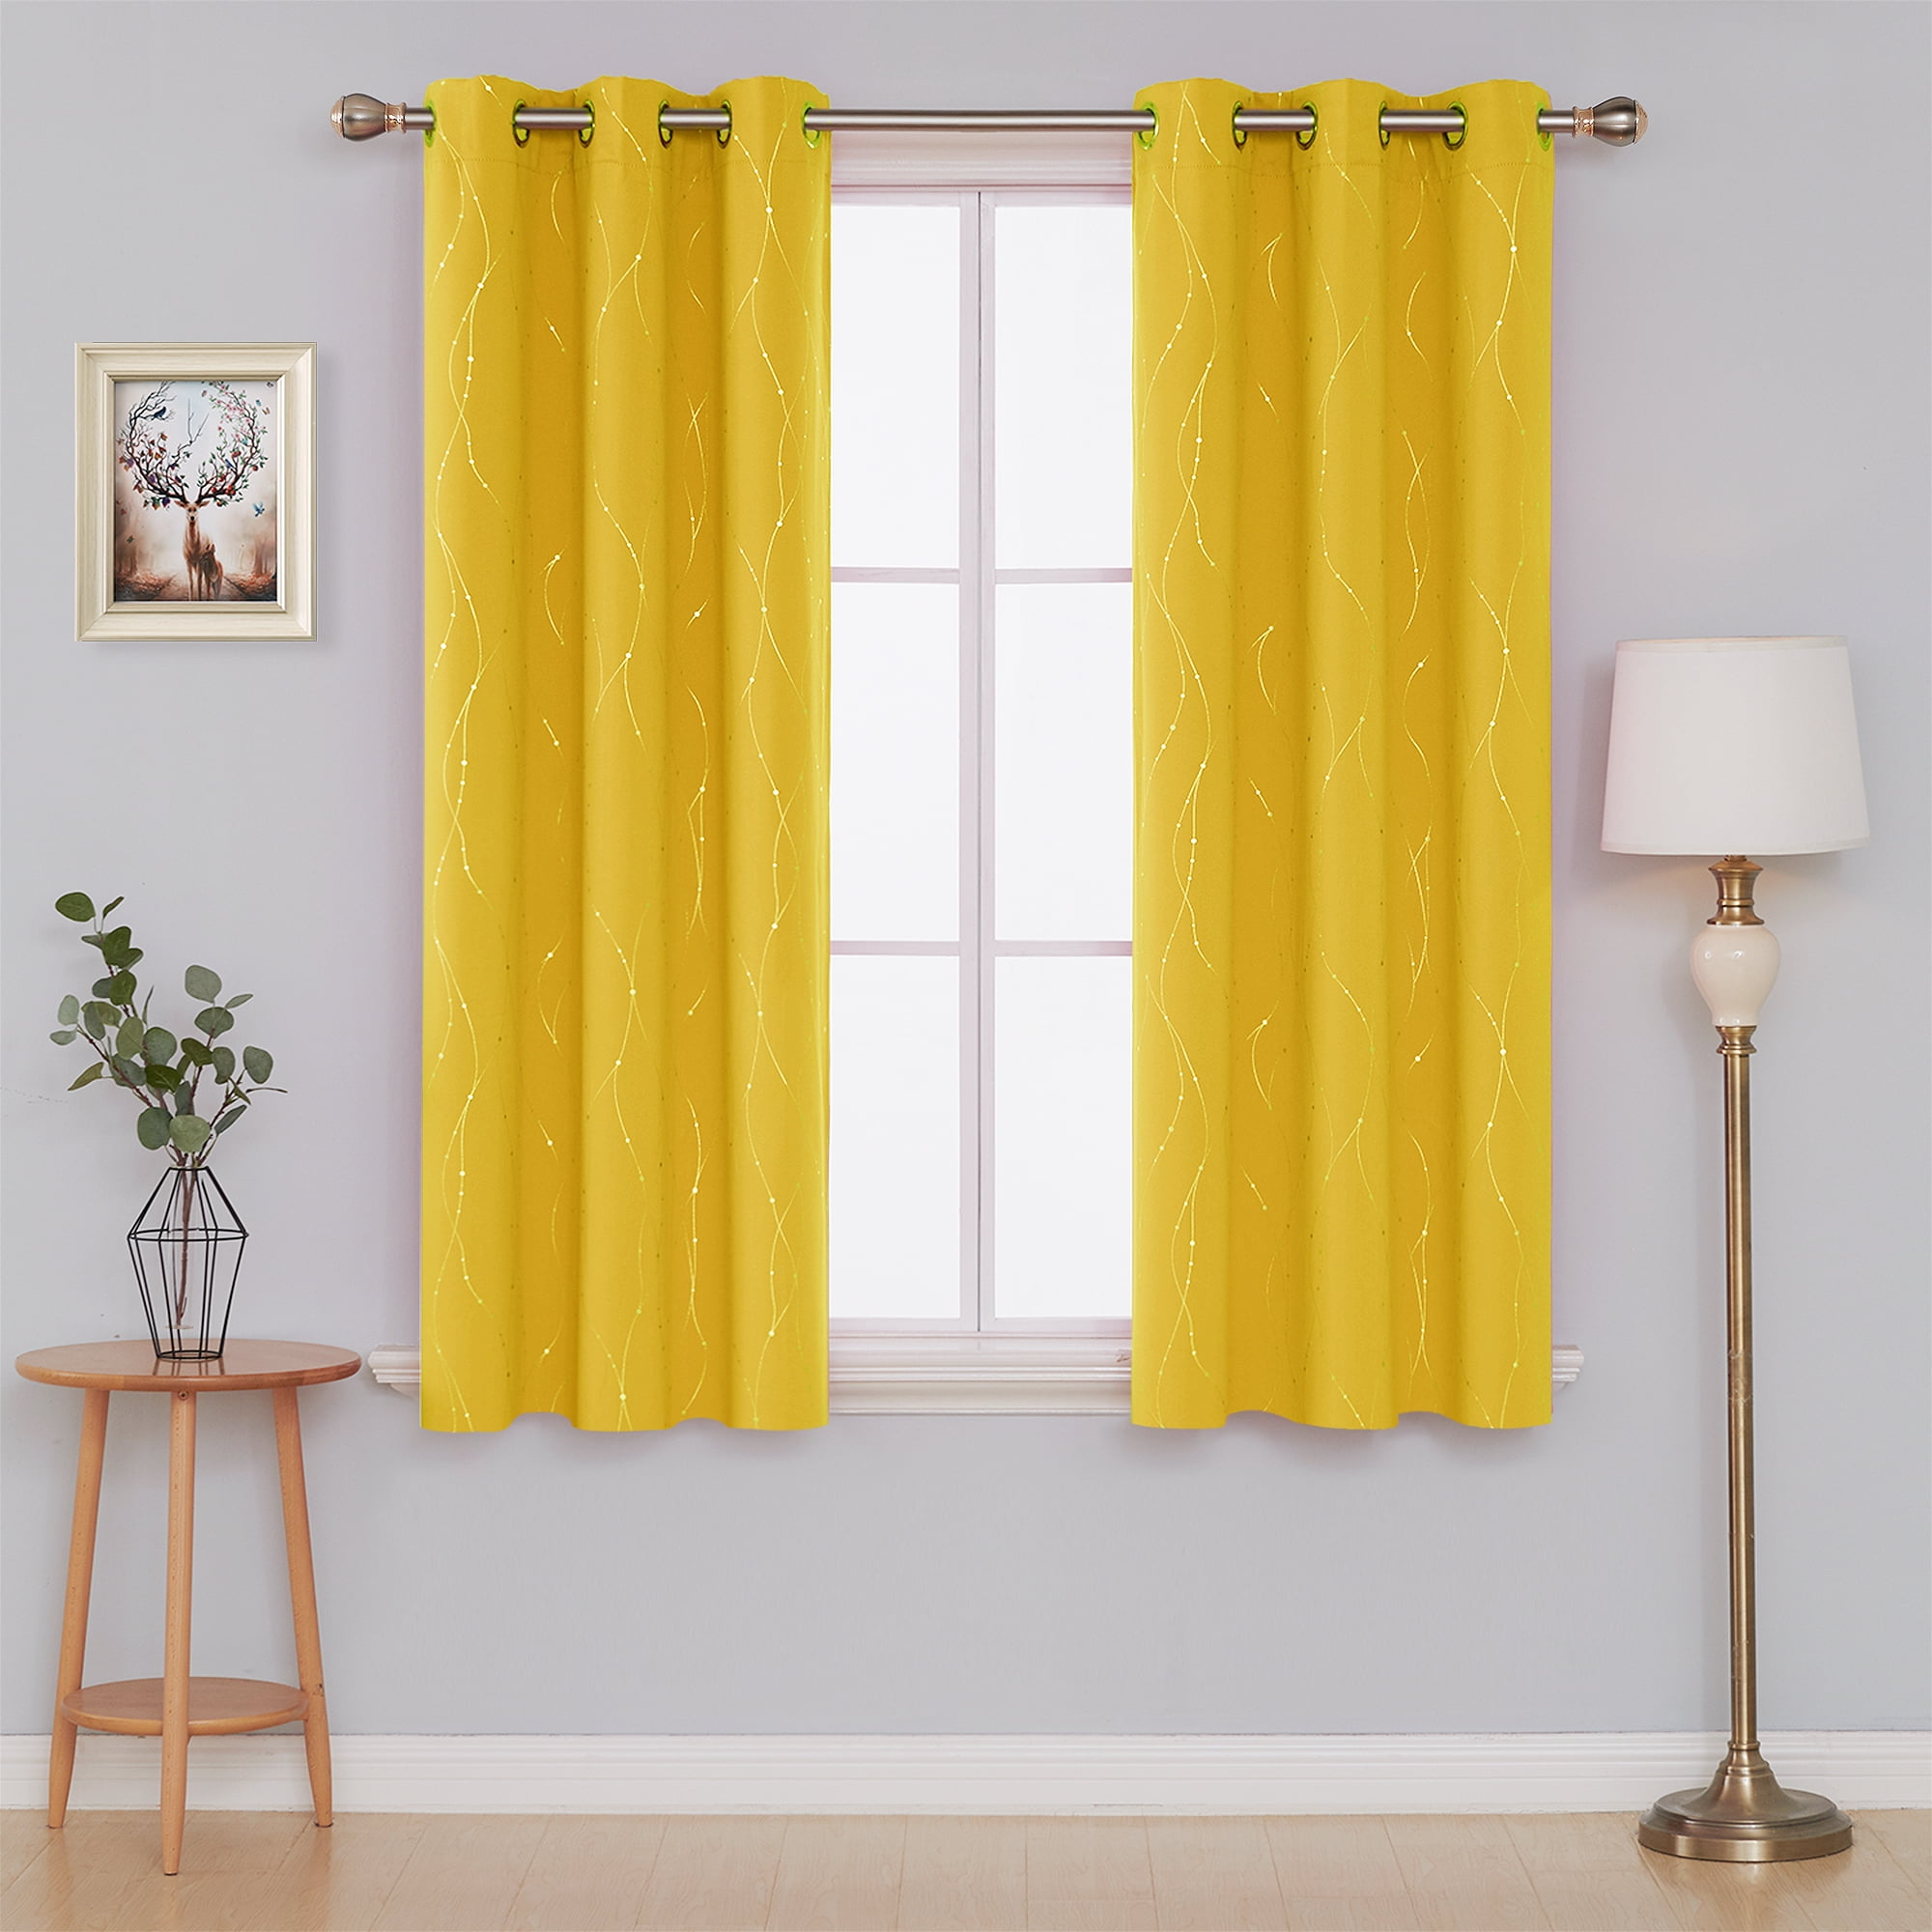 Deconovo Blackout Curtains Grommet Thermal Insulated Room Darkening ...